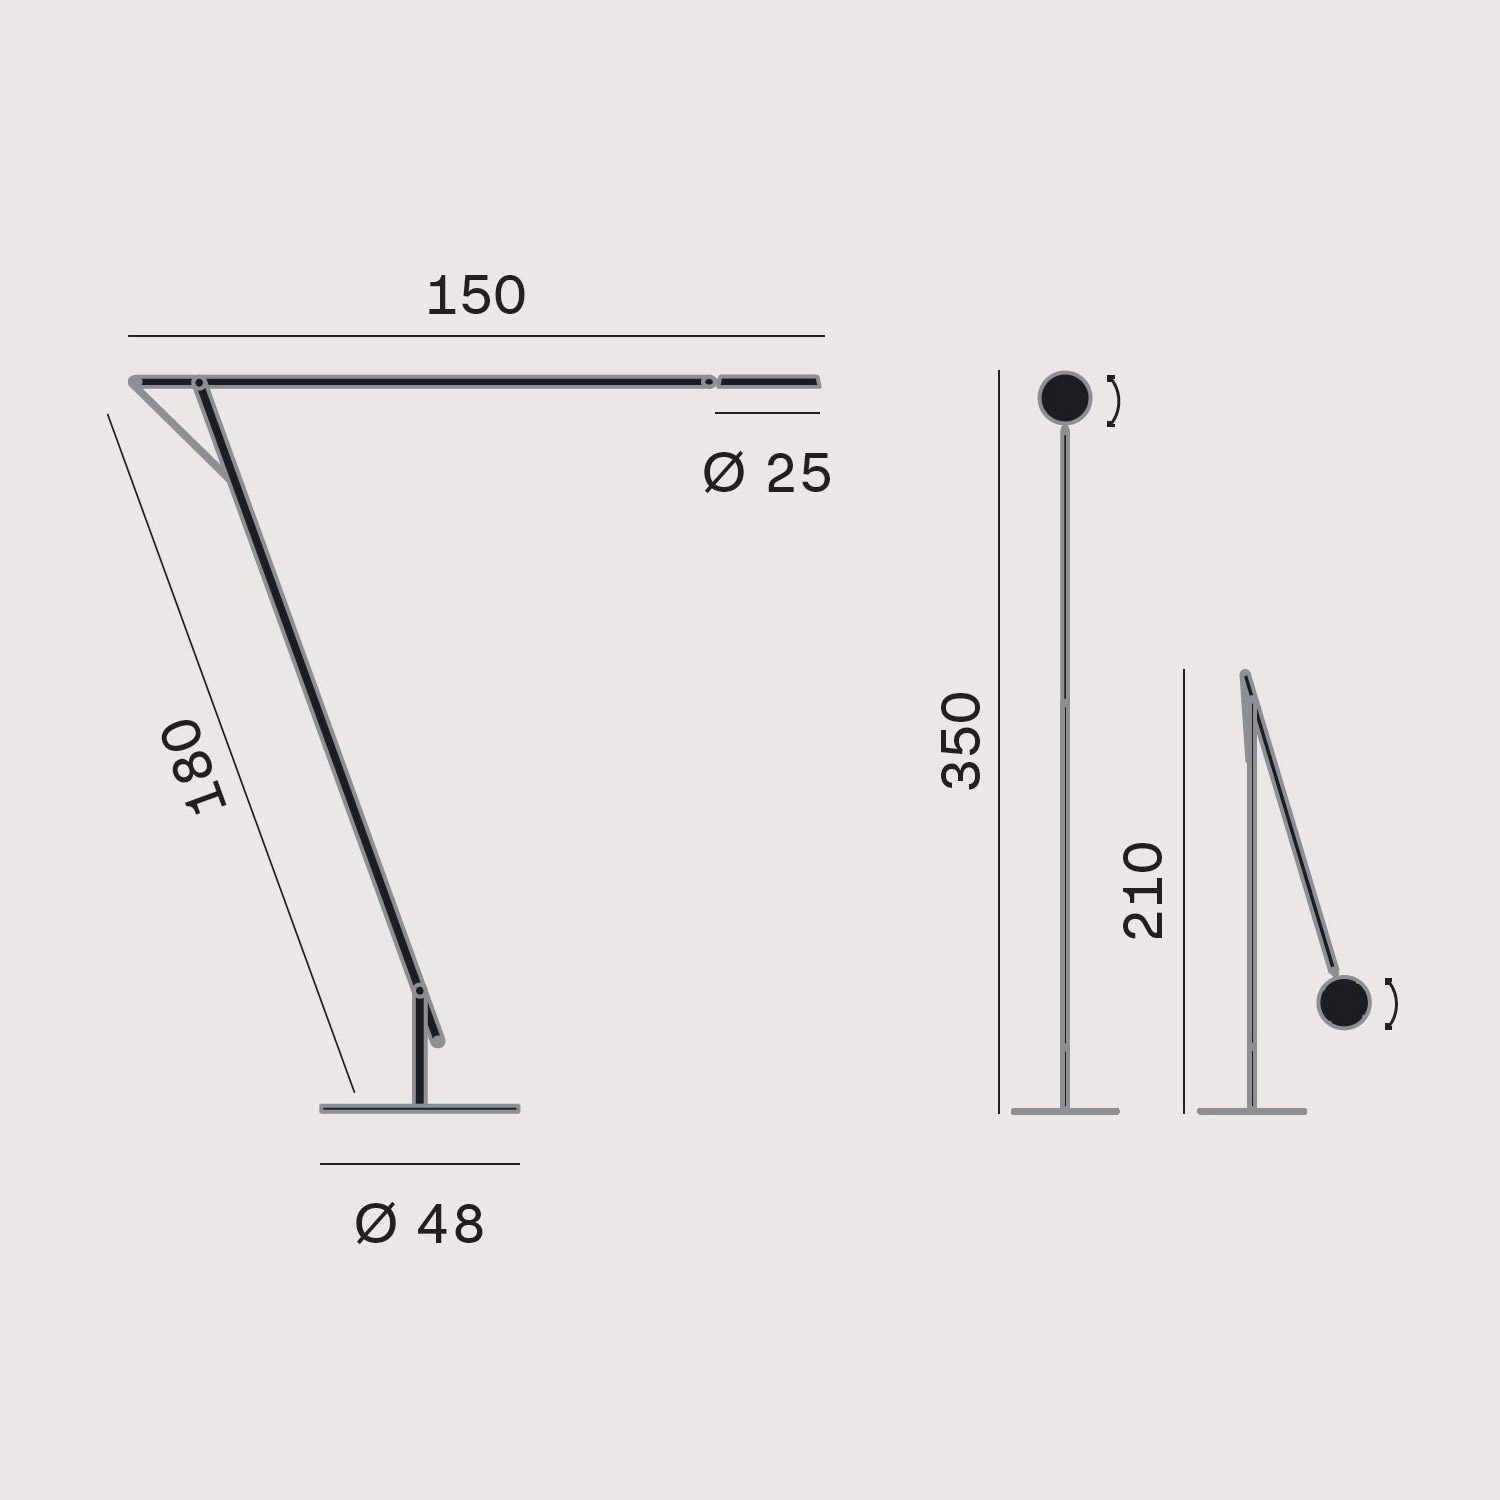 String XL floor lamp by Rotaliana